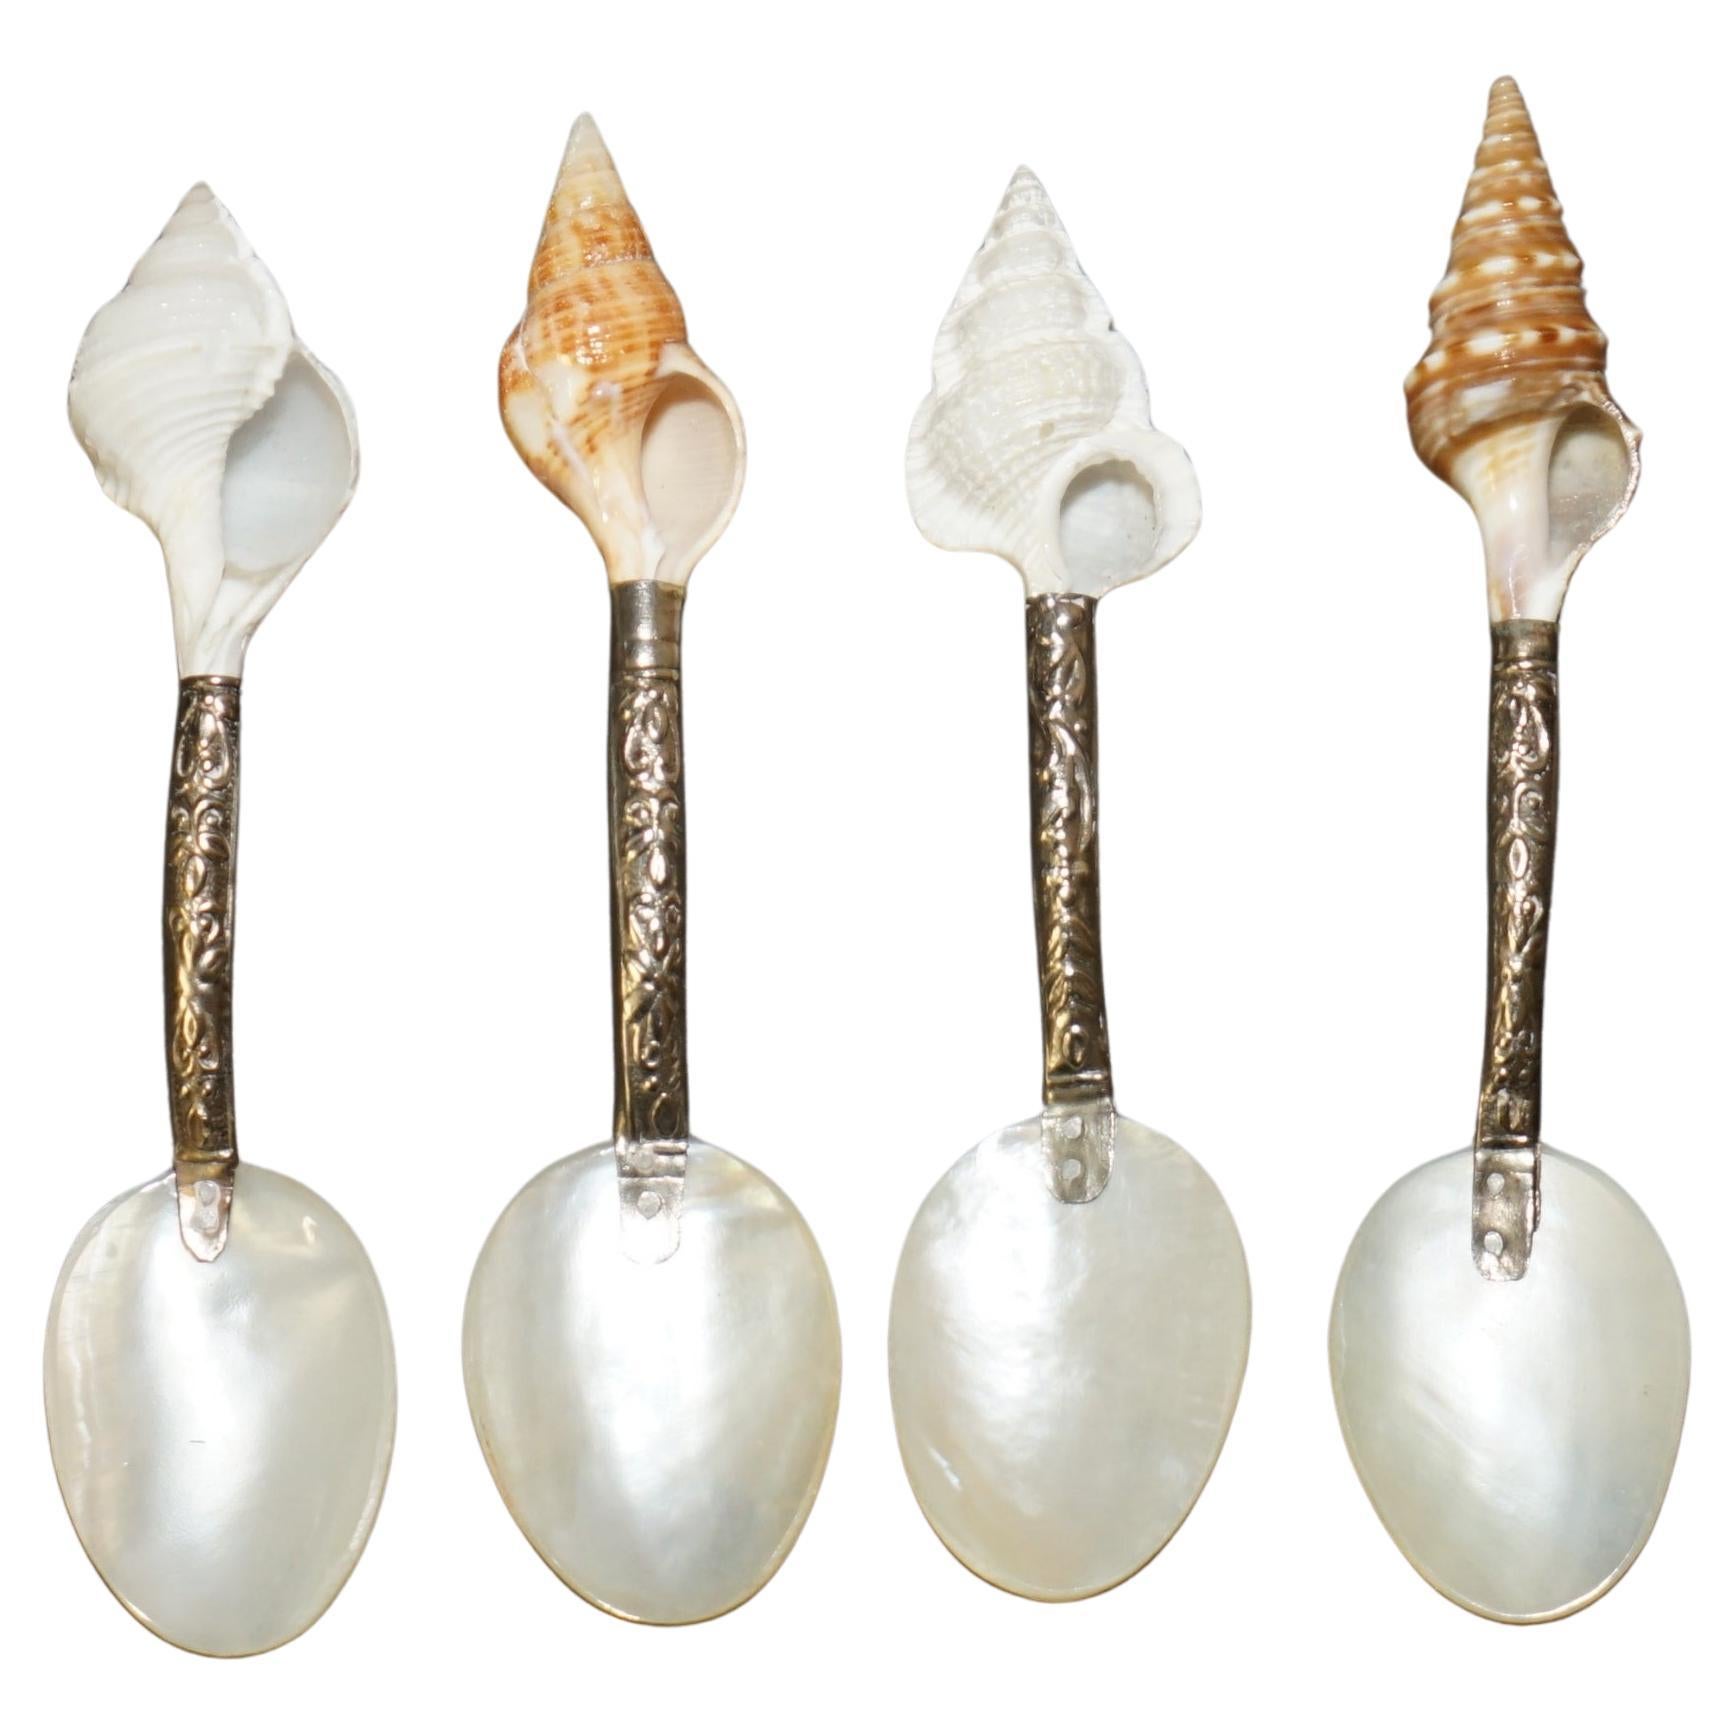 FOUR ANTIQUE ViCTORIAN MOTHER OF PEARL & STERLING SILVER TESTED SHELL TEA SPOONS For Sale